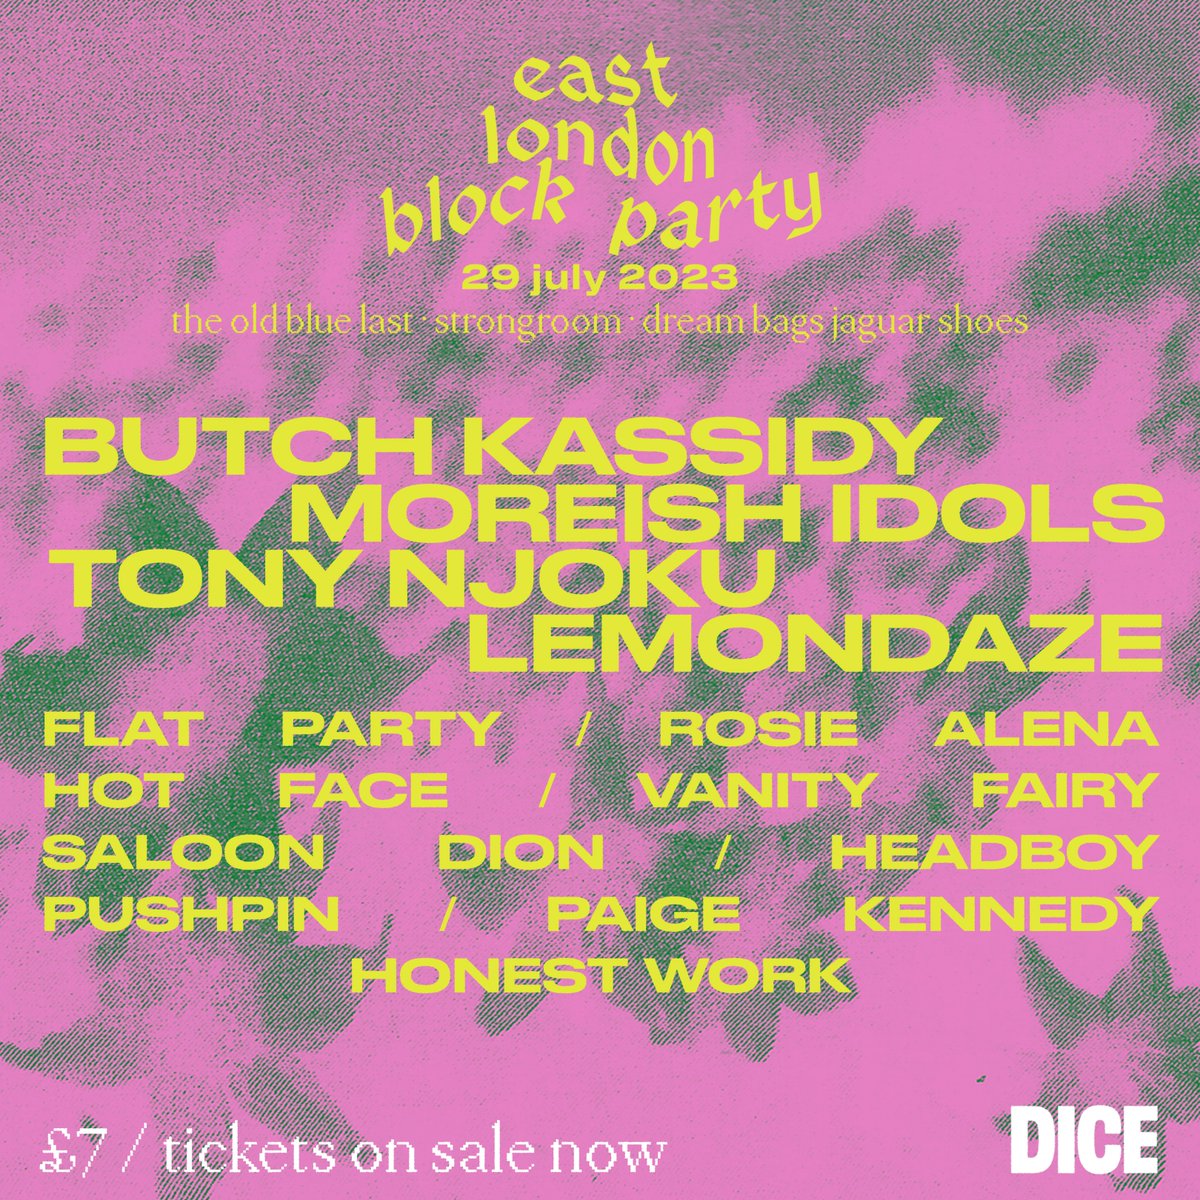 New for London in 2023...🛸 East London Block Party has announced it's final wave of acts for the July 29th festival! Tix at £7: bit.ly/3Xtkdk4 😊 Ft @moreishidols @lemondazeband @RosieAlena @vanityfairydust @SaloonDion @theoldbluelast @JaguarShoesCo @StrongroomBar